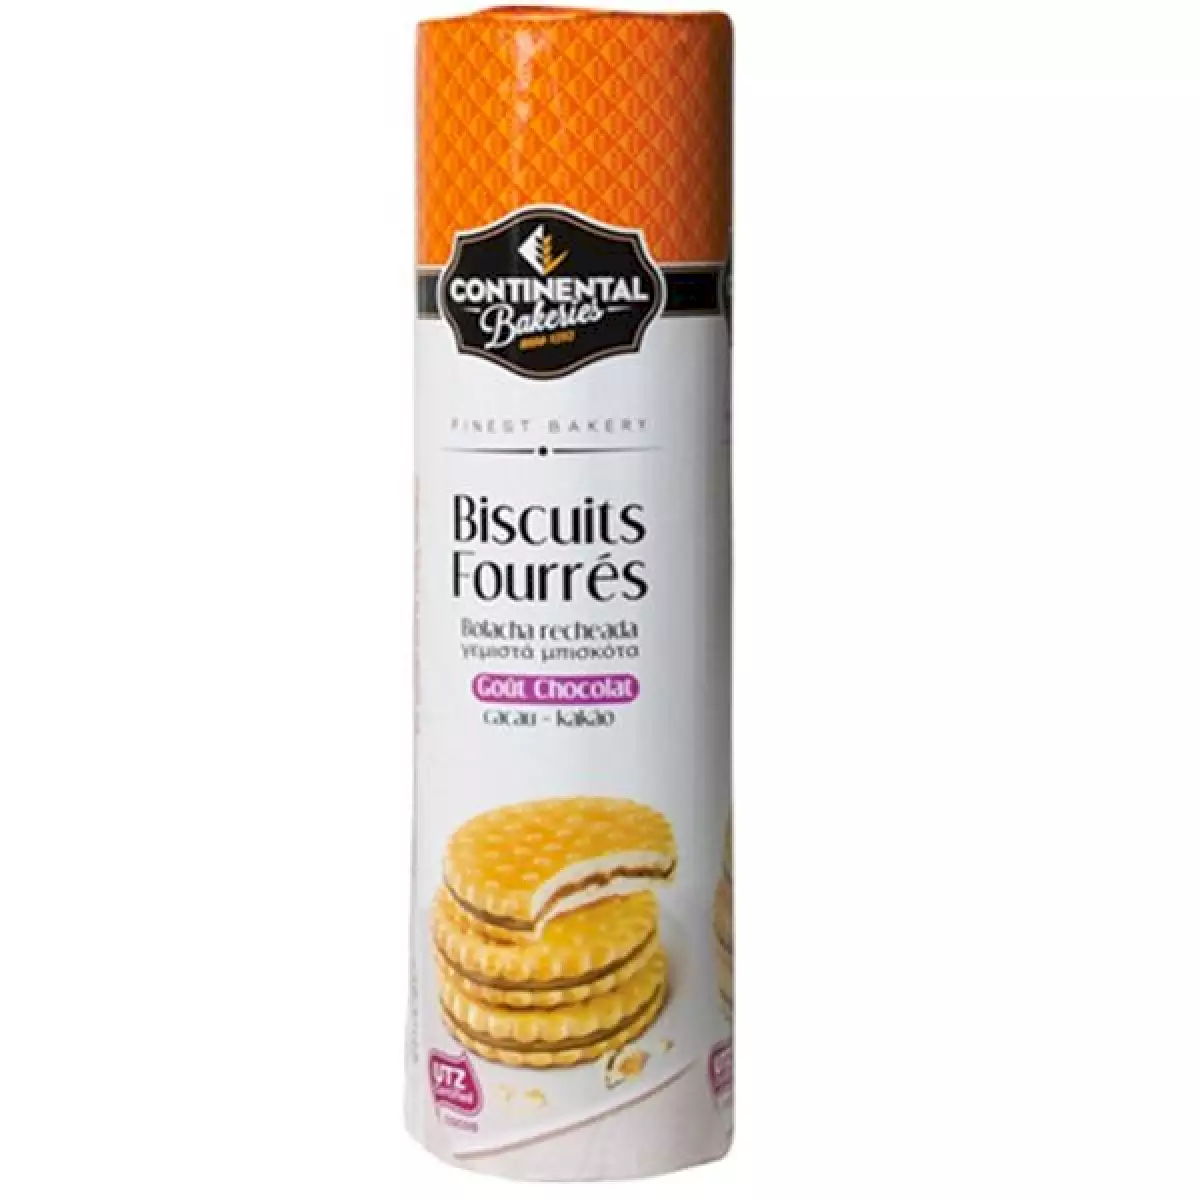 GOUTER FOURRE ROND CHOCOLAT PQ 300 GR